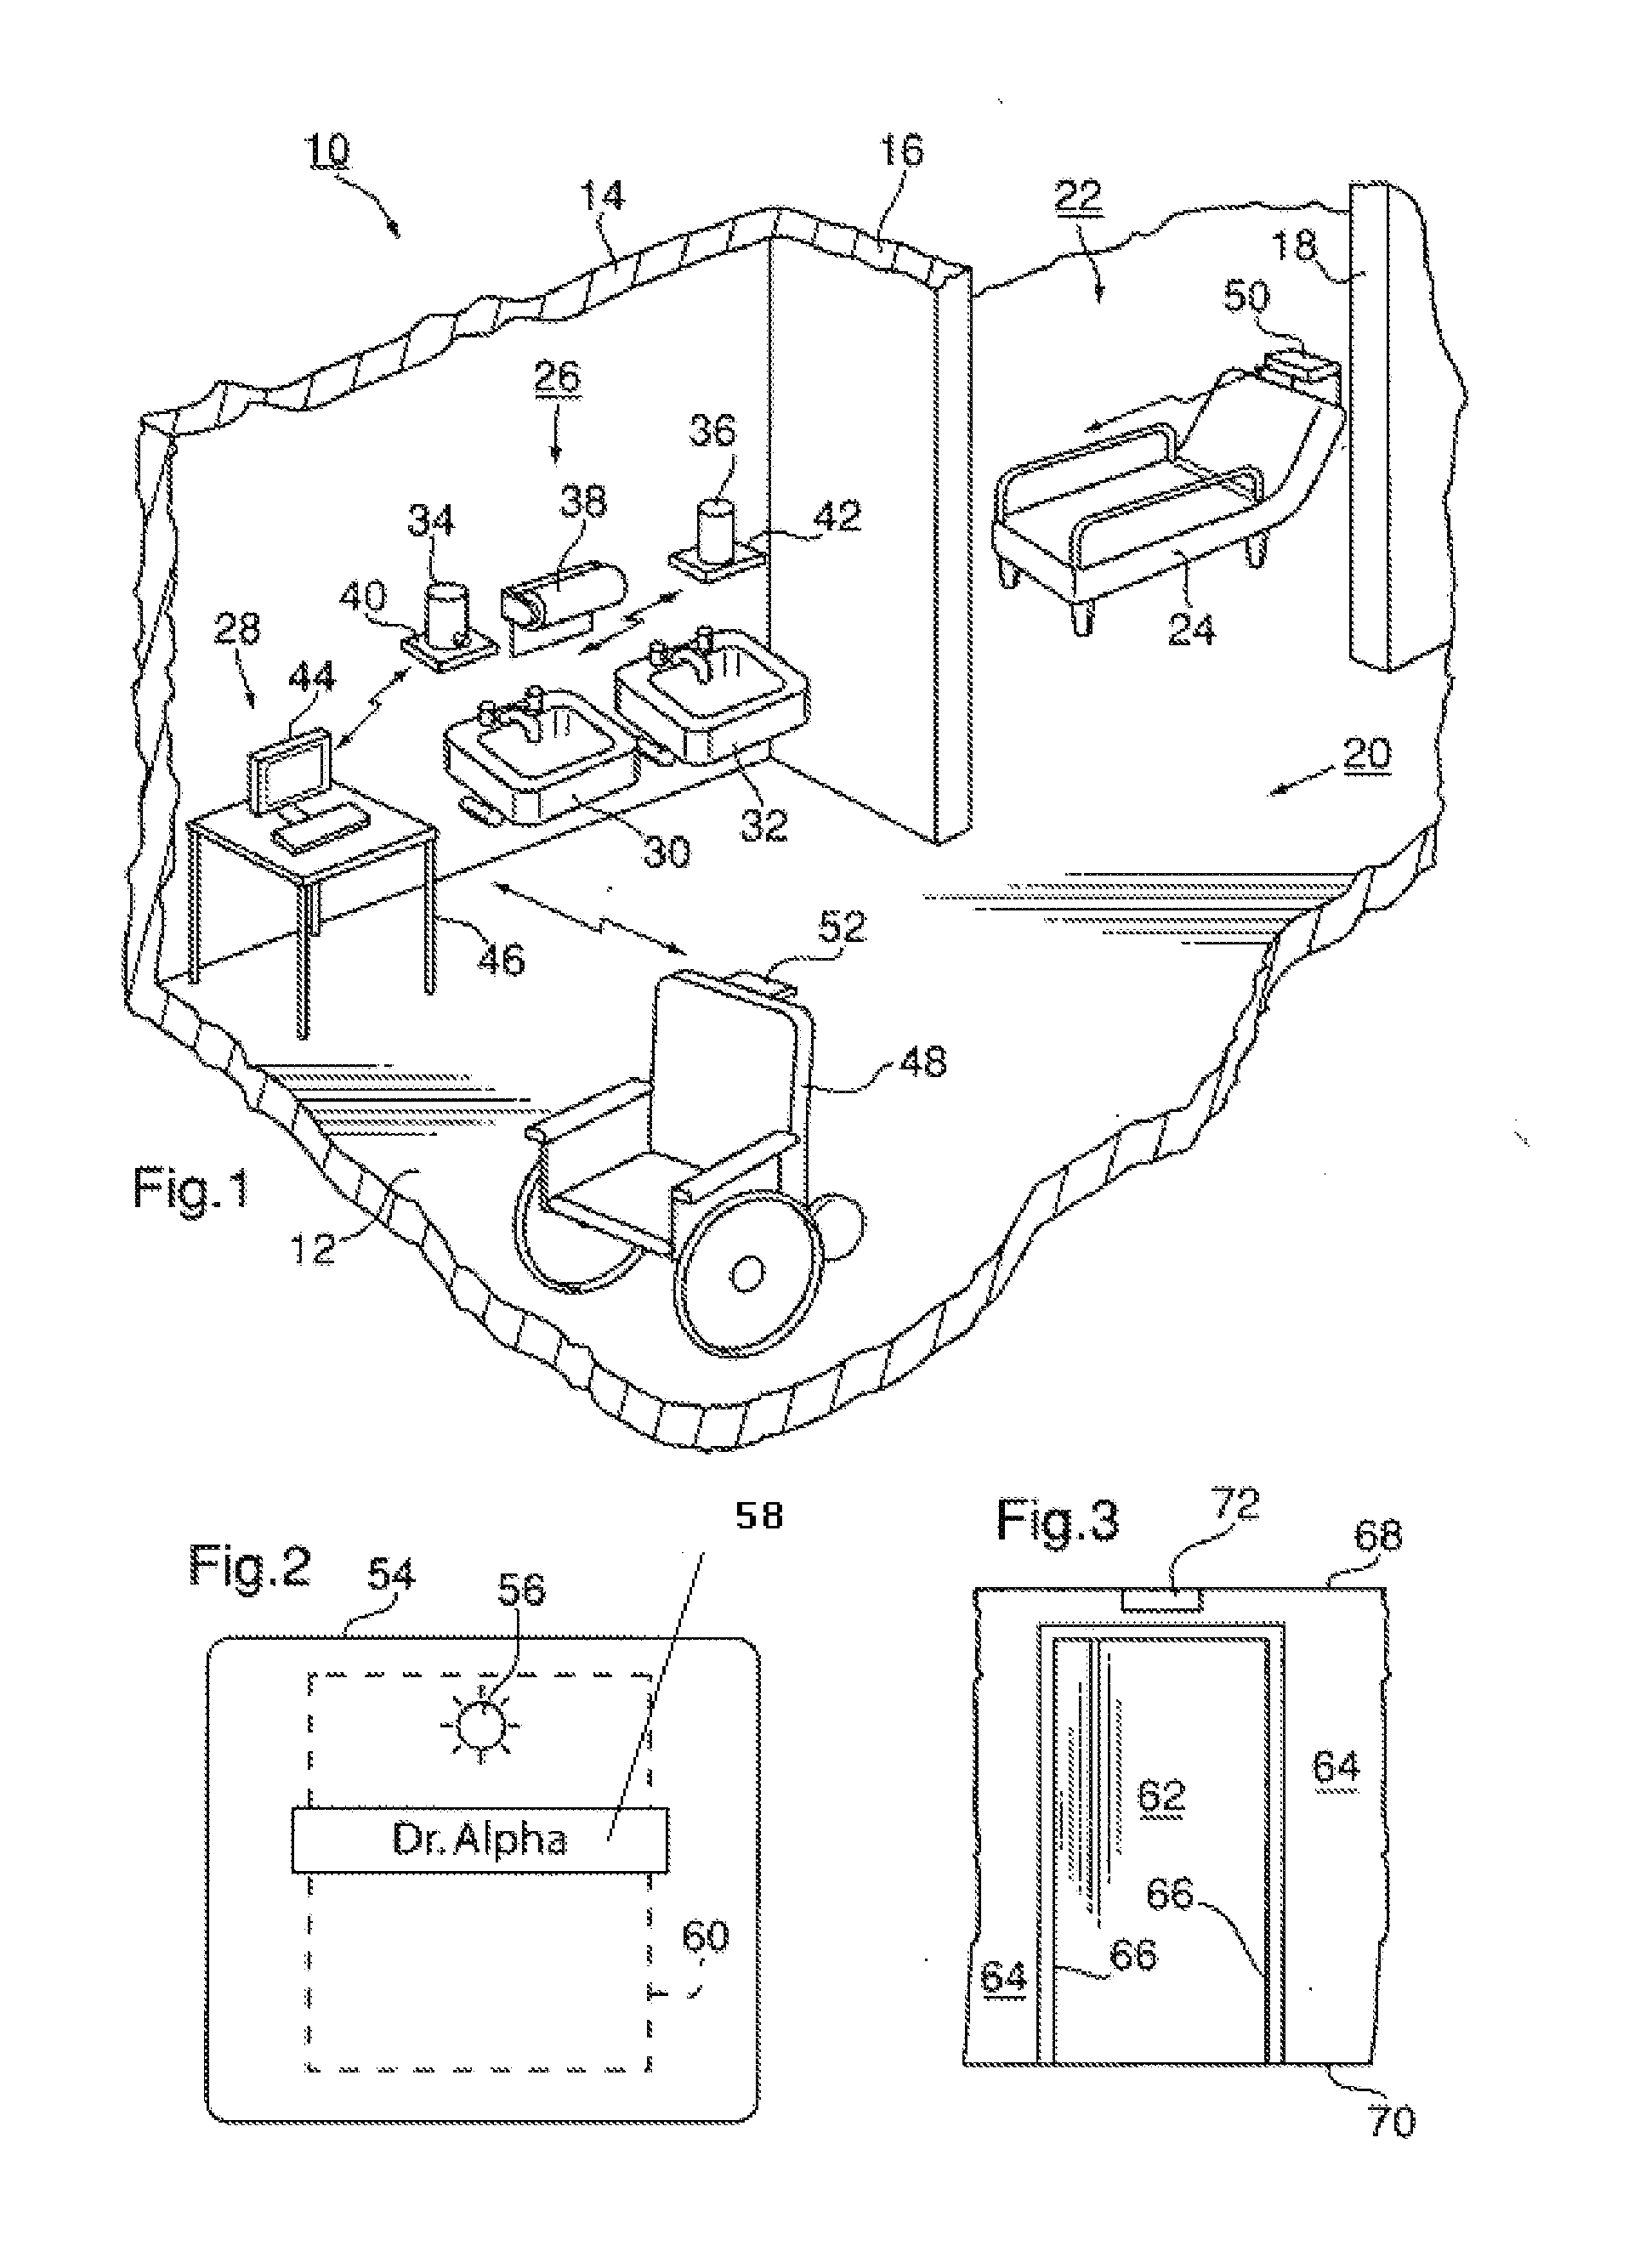 Personnel location and monitoring system and method for enclosed facilities